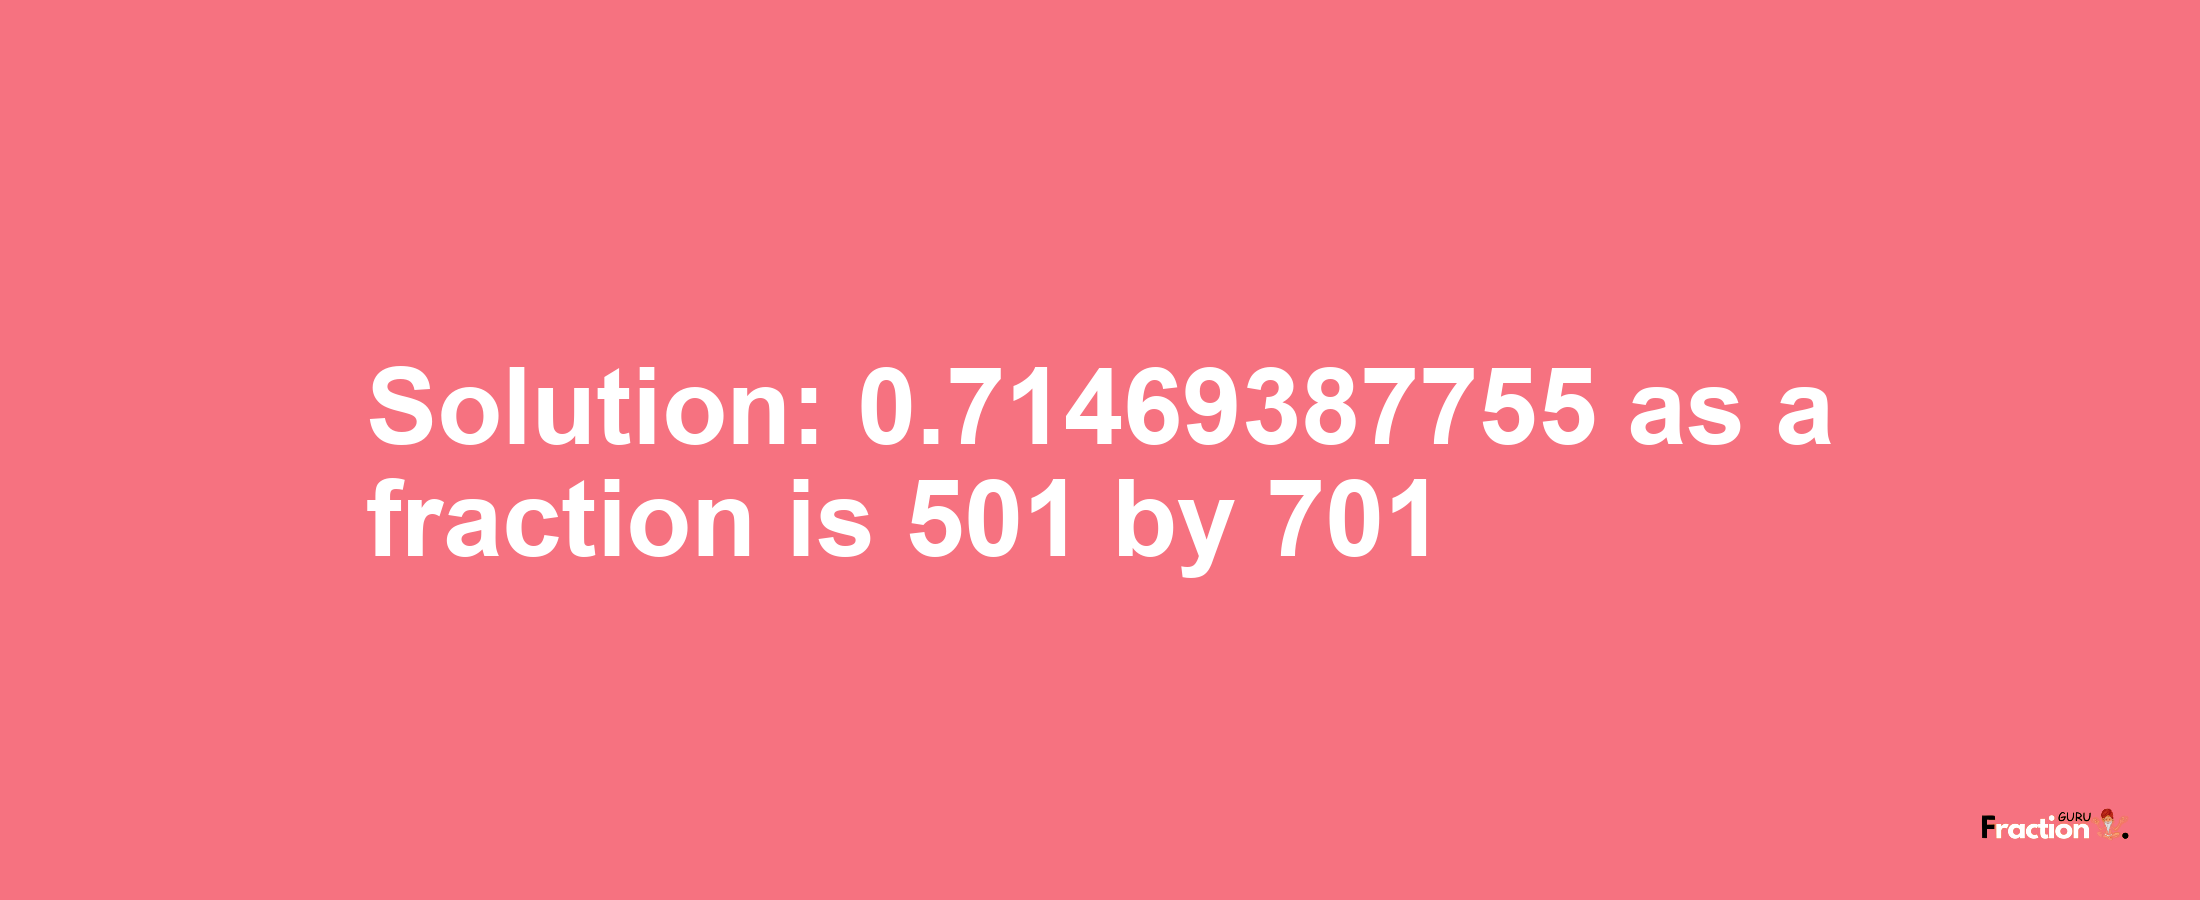 Solution:0.71469387755 as a fraction is 501/701